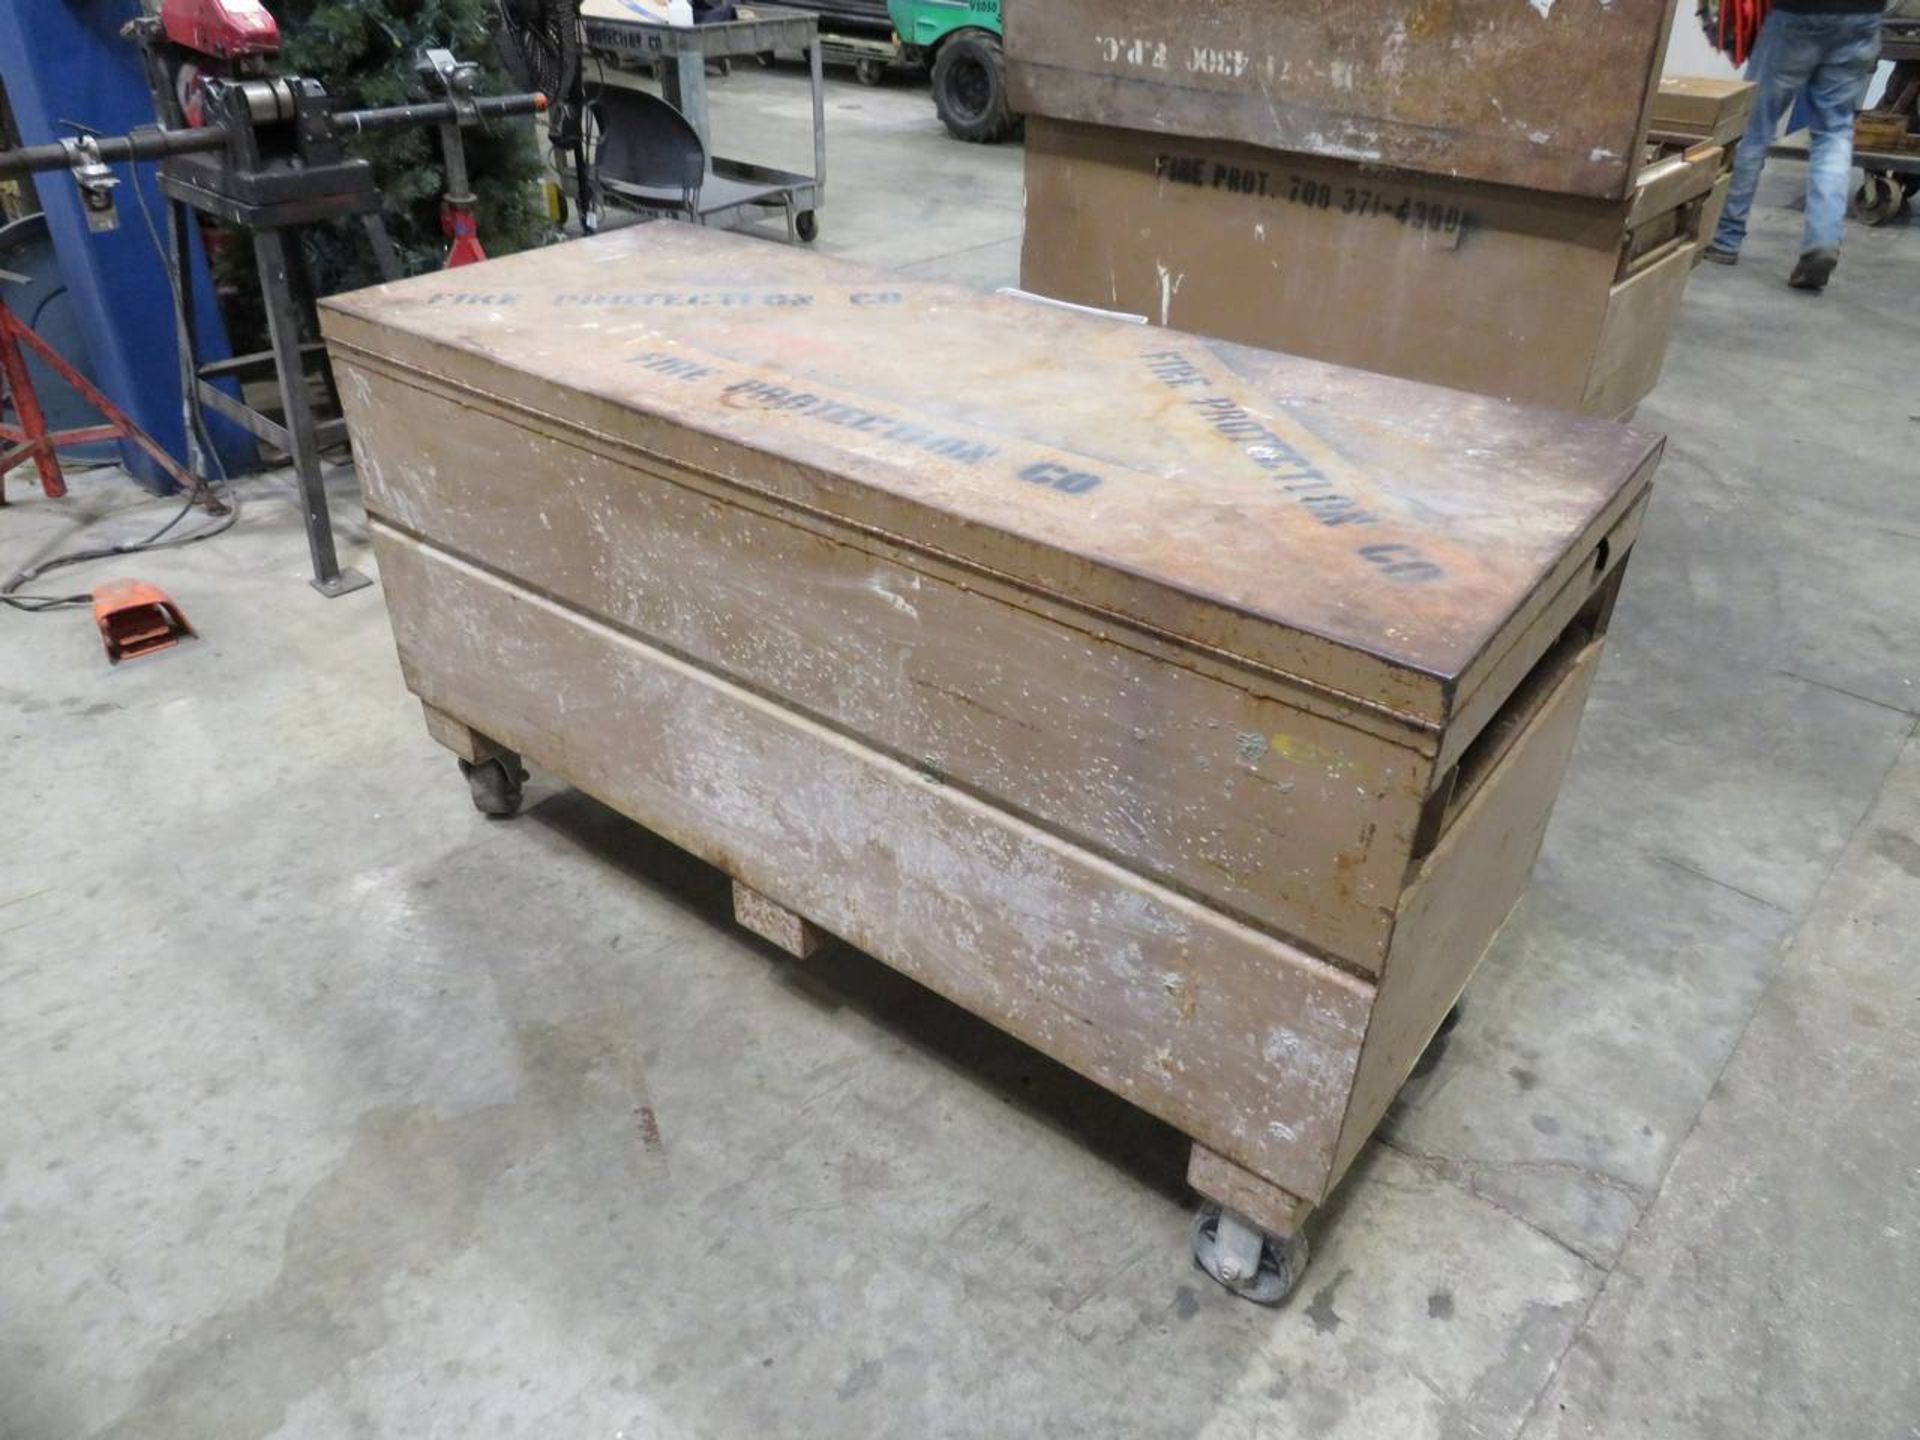 Knaack 20.25 Cu. Ft. - Approx. 60" W x 24" D x 35" H Storage Chest - Image 6 of 6